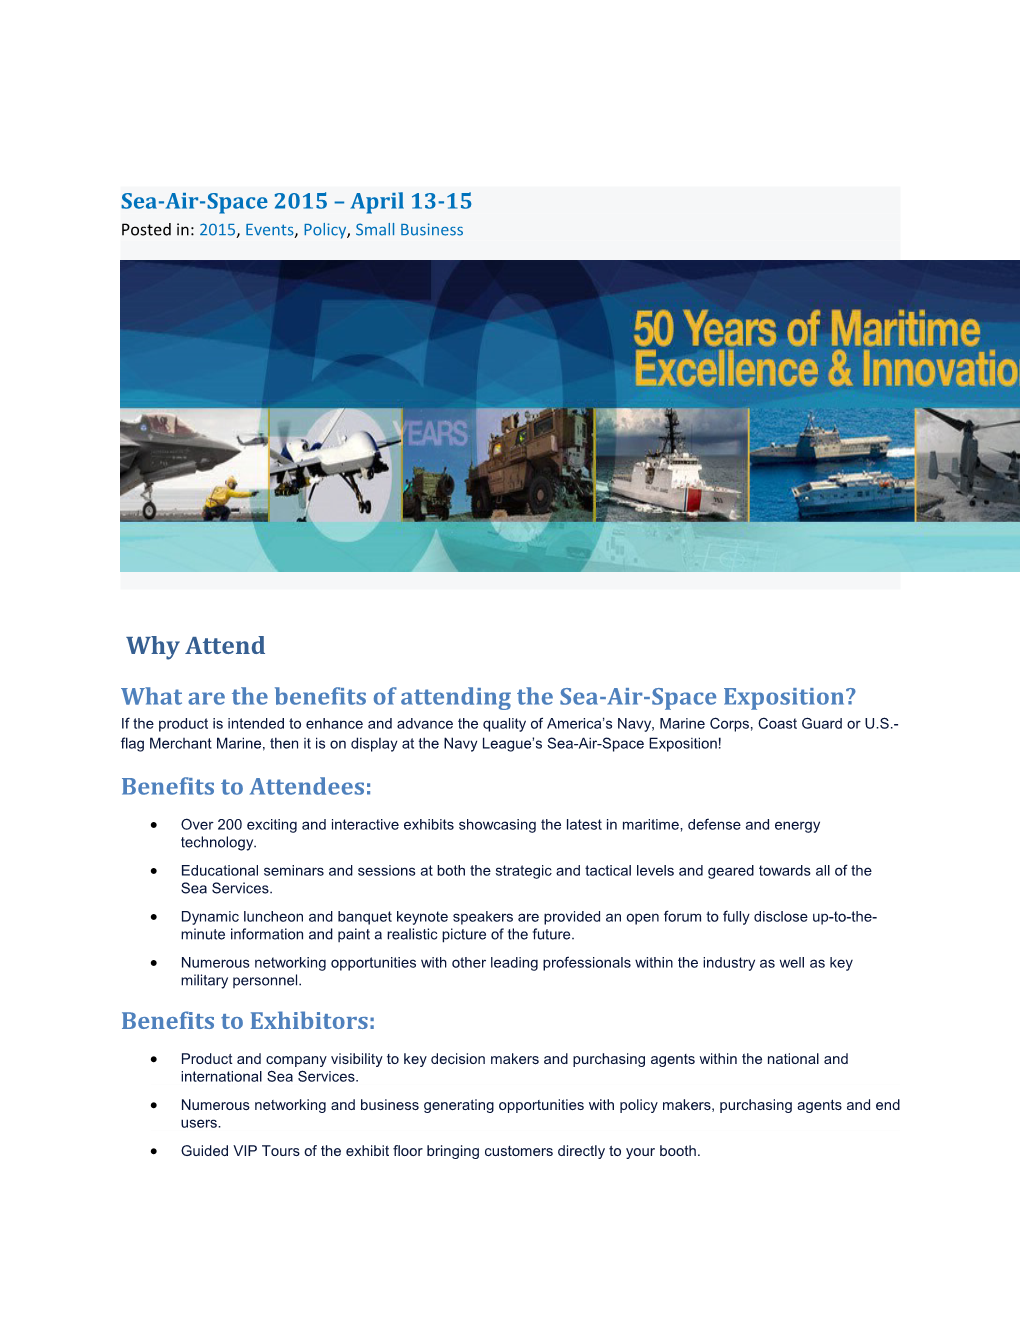 What Are the Benefits of Attending the Sea-Air-Space Exposition?